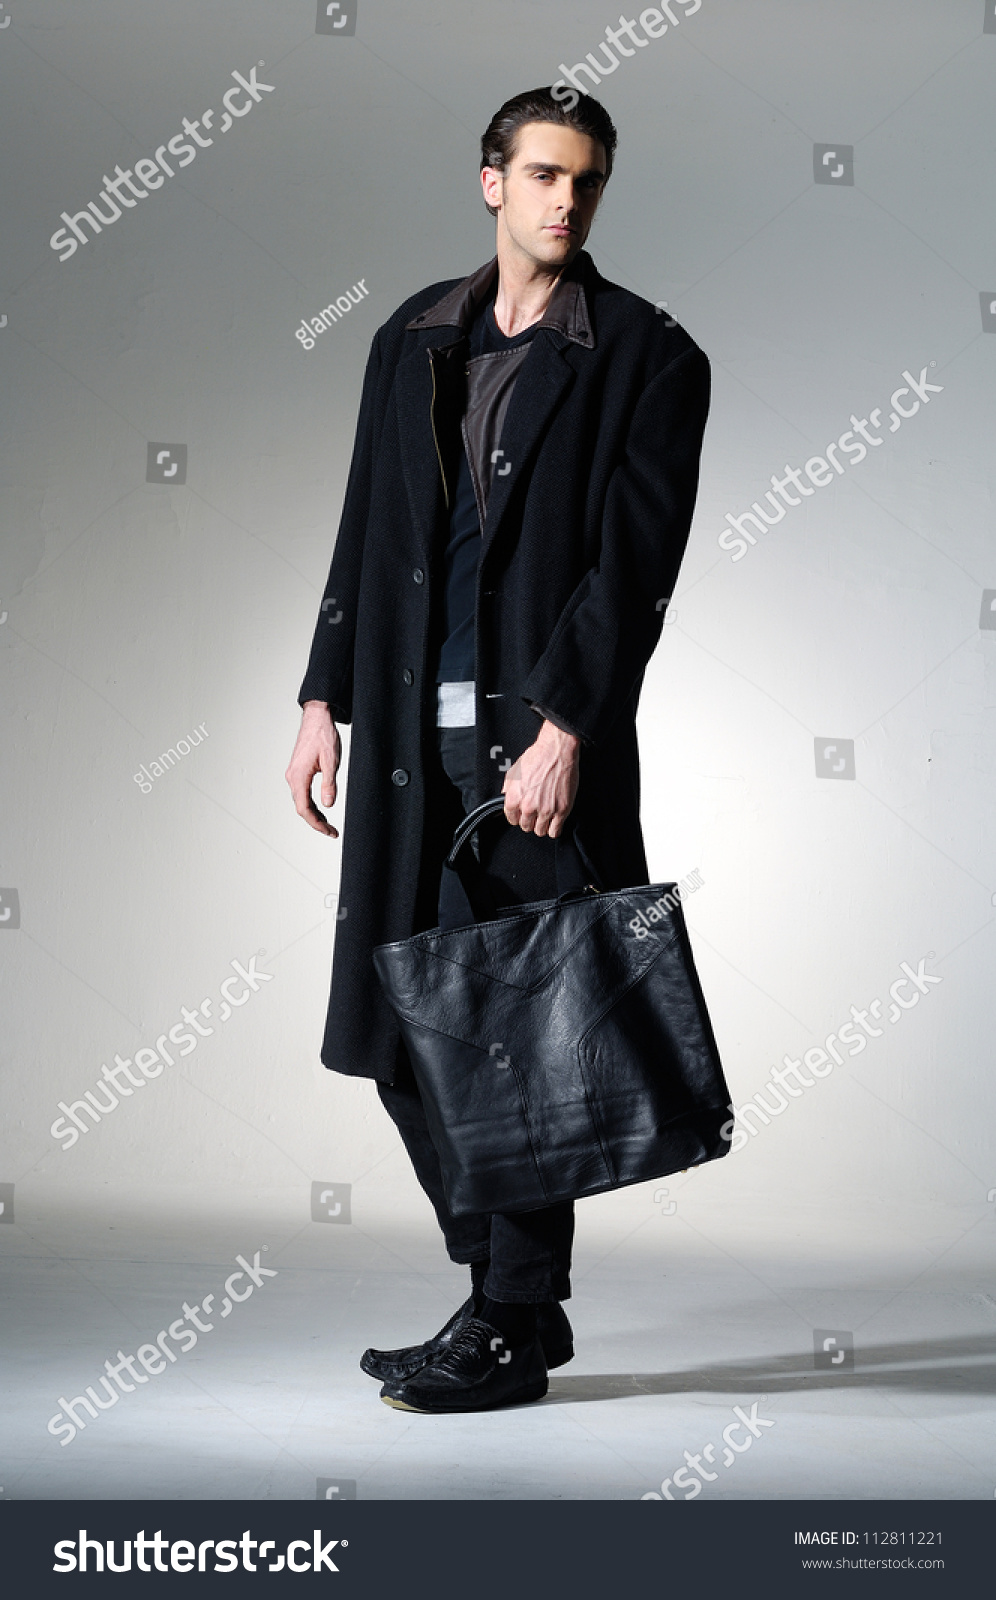 Full Body Fashion Shot Of A Young Man In Coat Holding Black Bag On